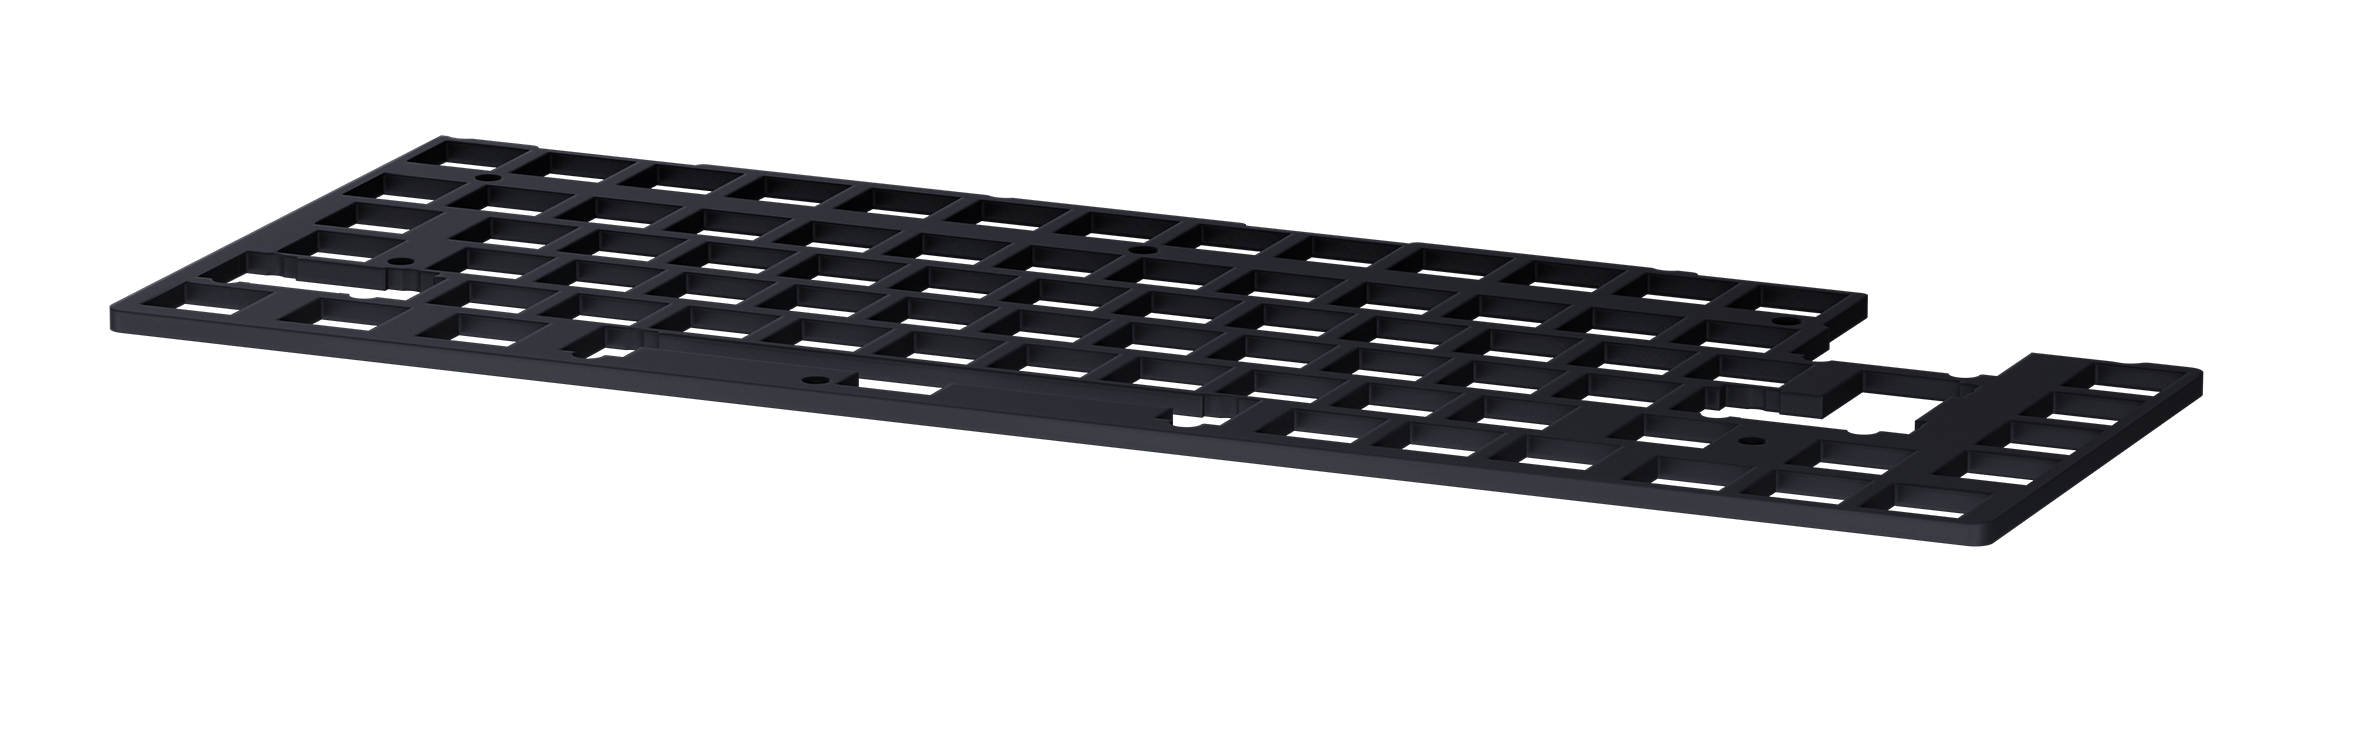 ASUS ROG Azoth M701 NXBN Gaming Keyboard - Tri-mode Connectivity - 2 OLED  Display - 100% Anti-Ghosting & N-Key Rollover - Windows & MacOS Compatible  